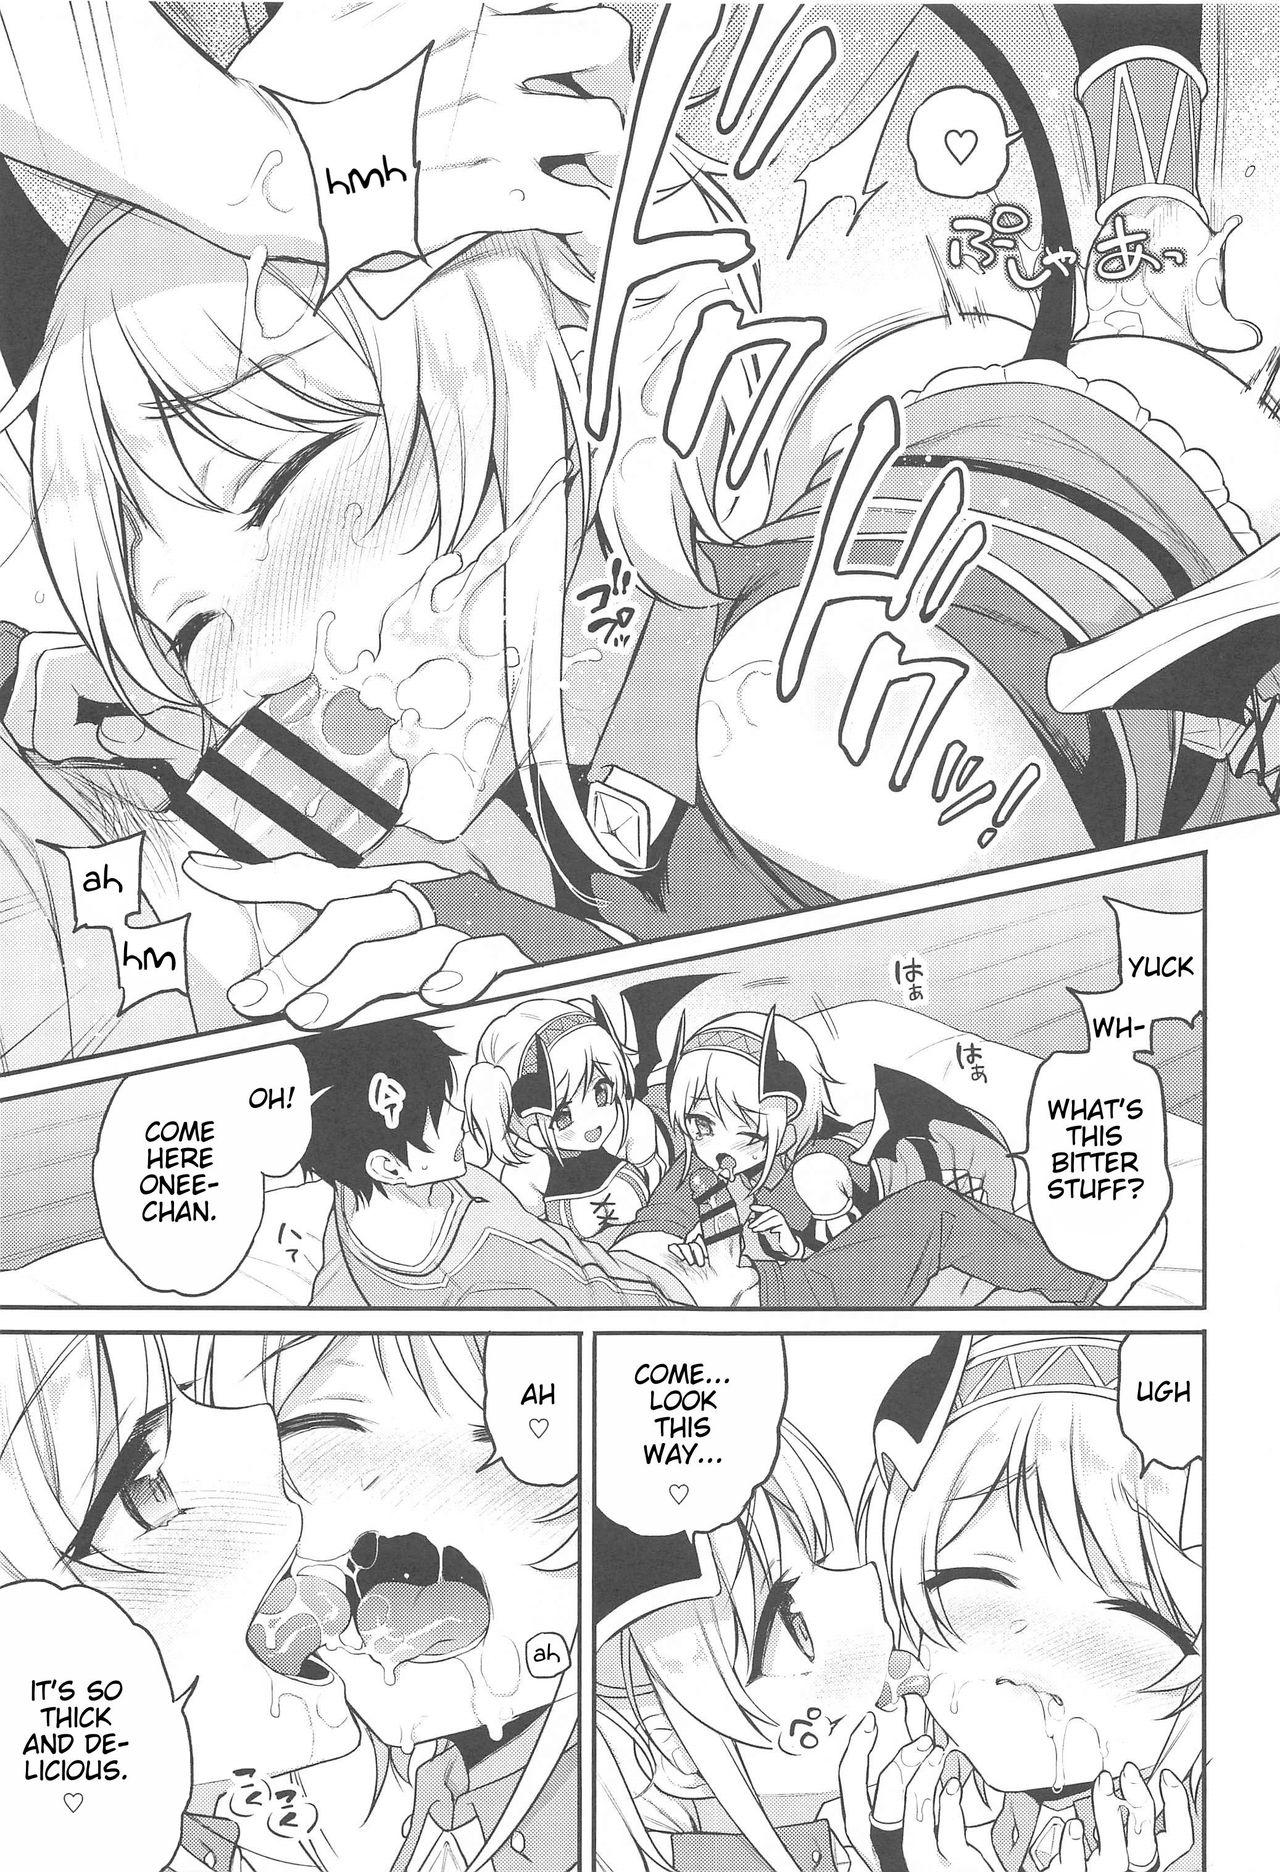 Africa Akari no Onee-chan Produce - Princess connect Female Domination - Page 8